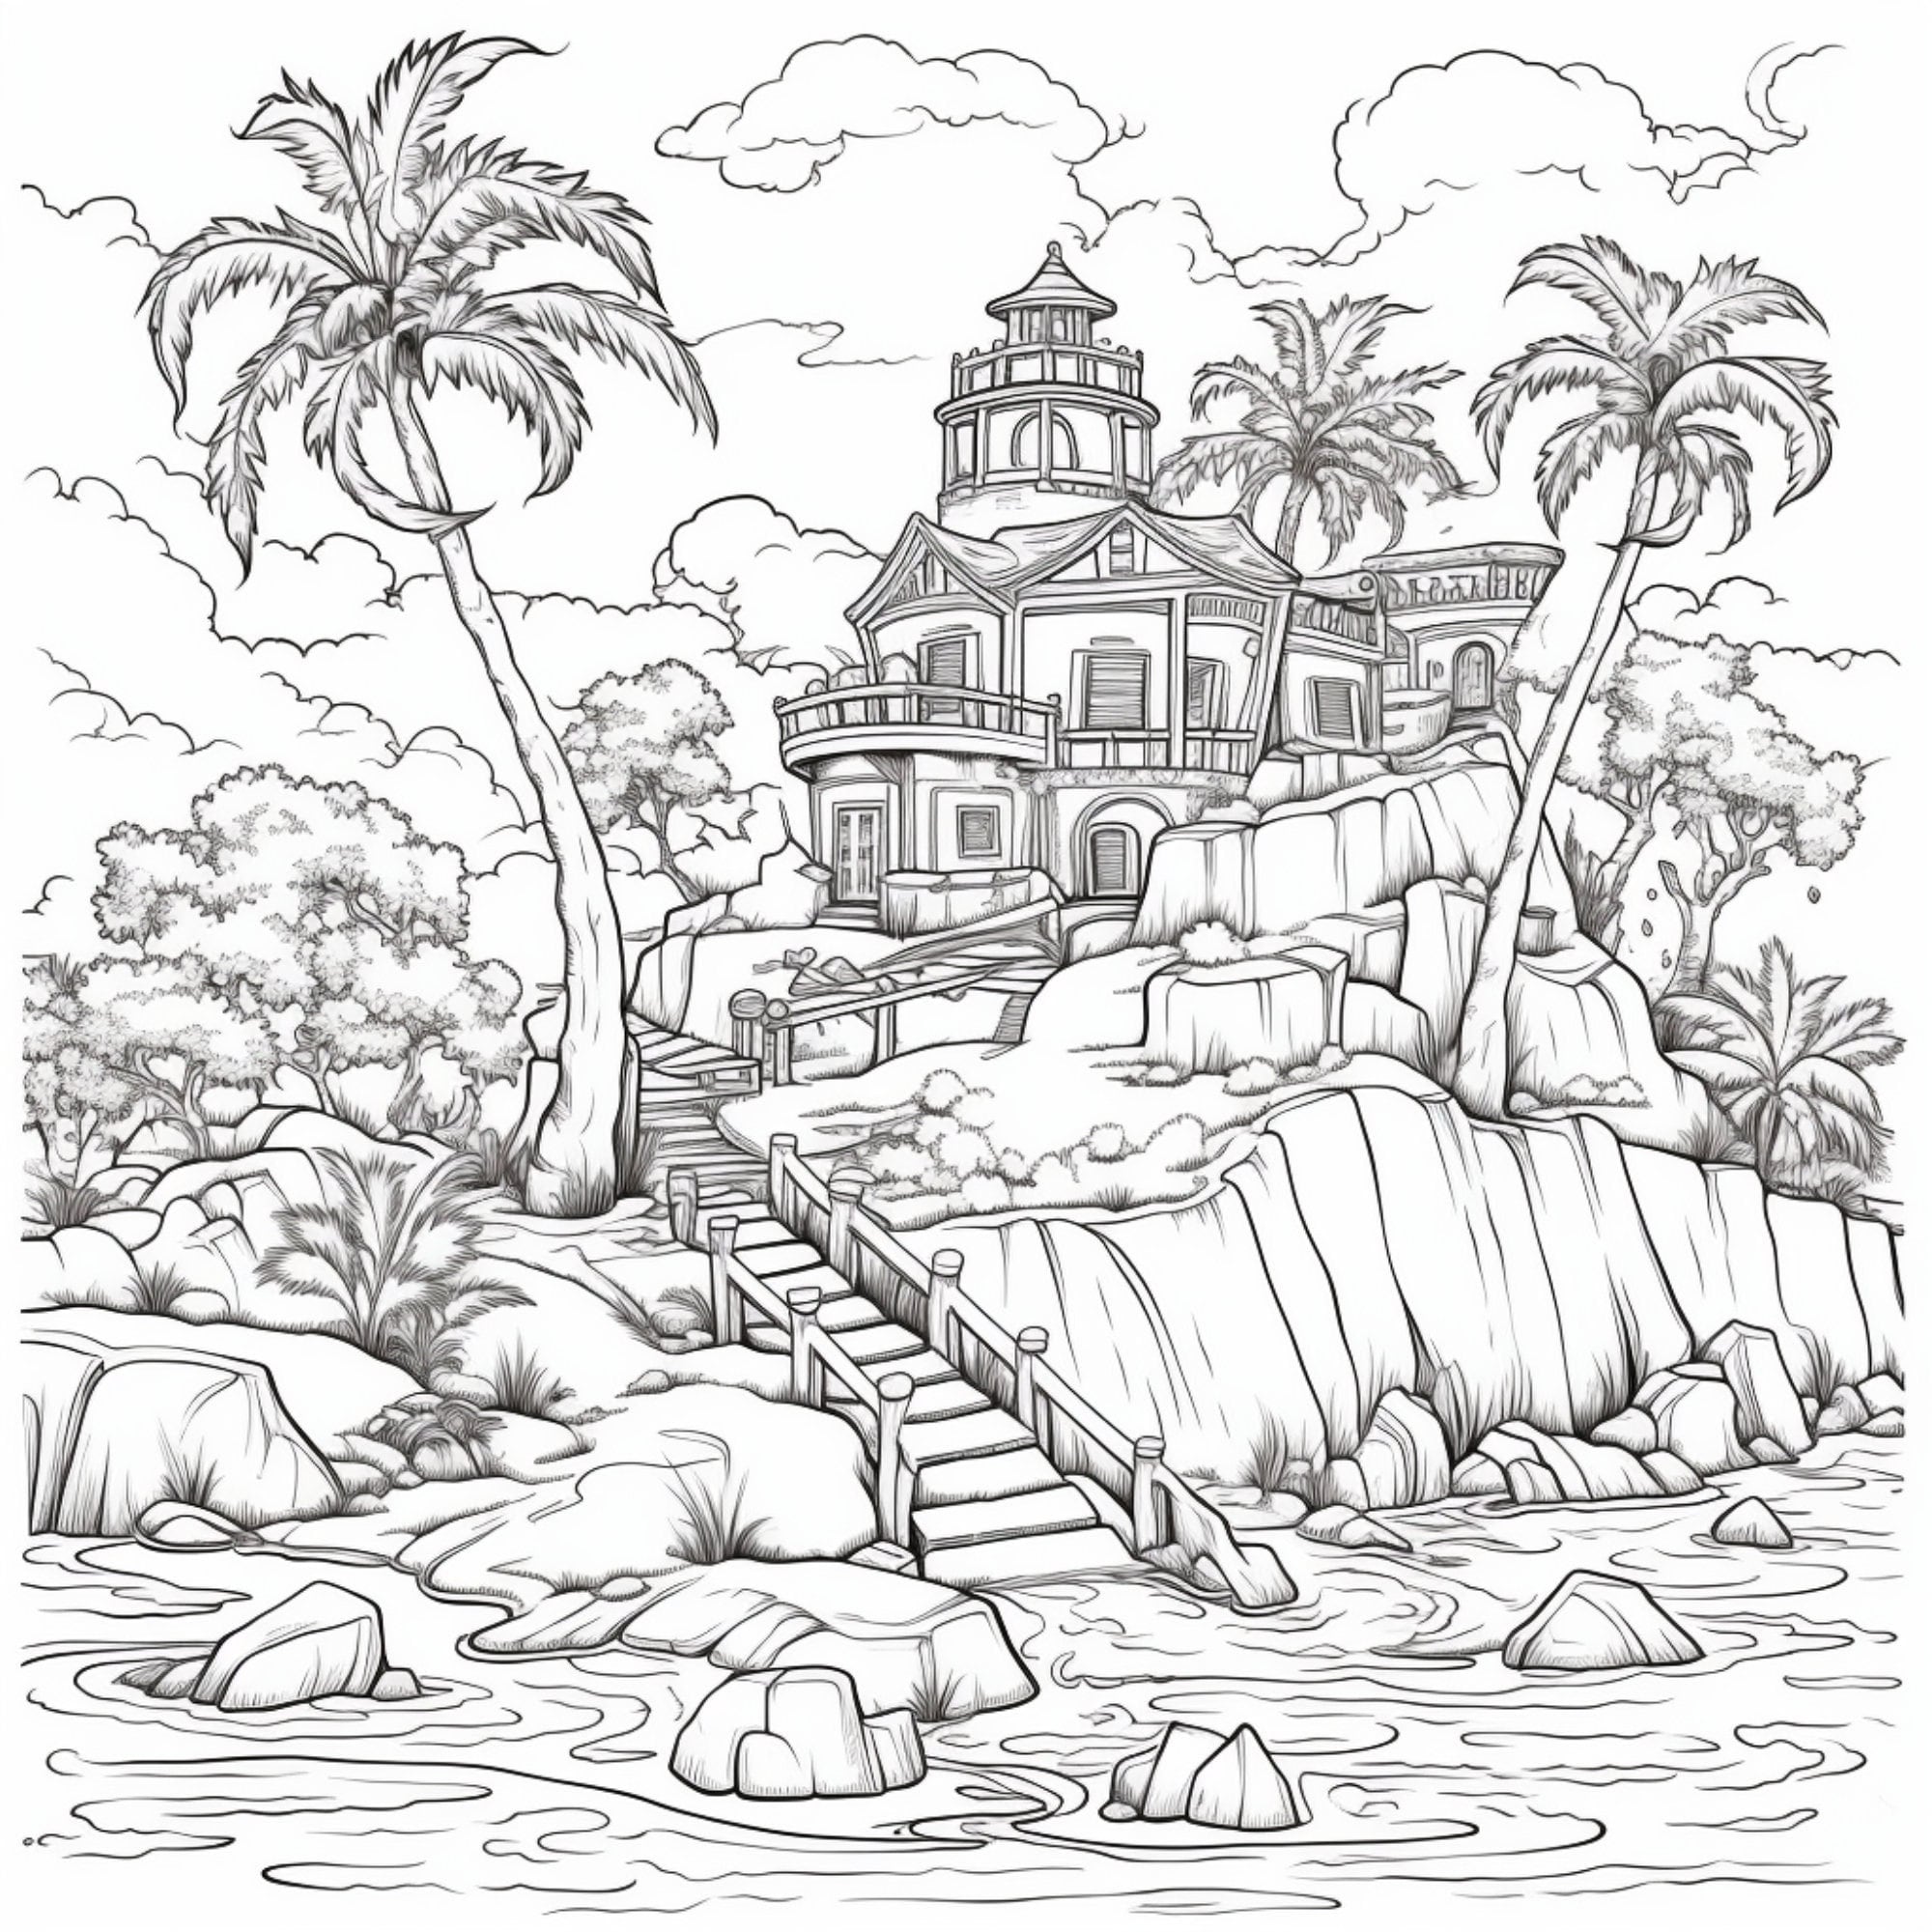 Printable tropical island coloring pages for kids and adults digital download pdf